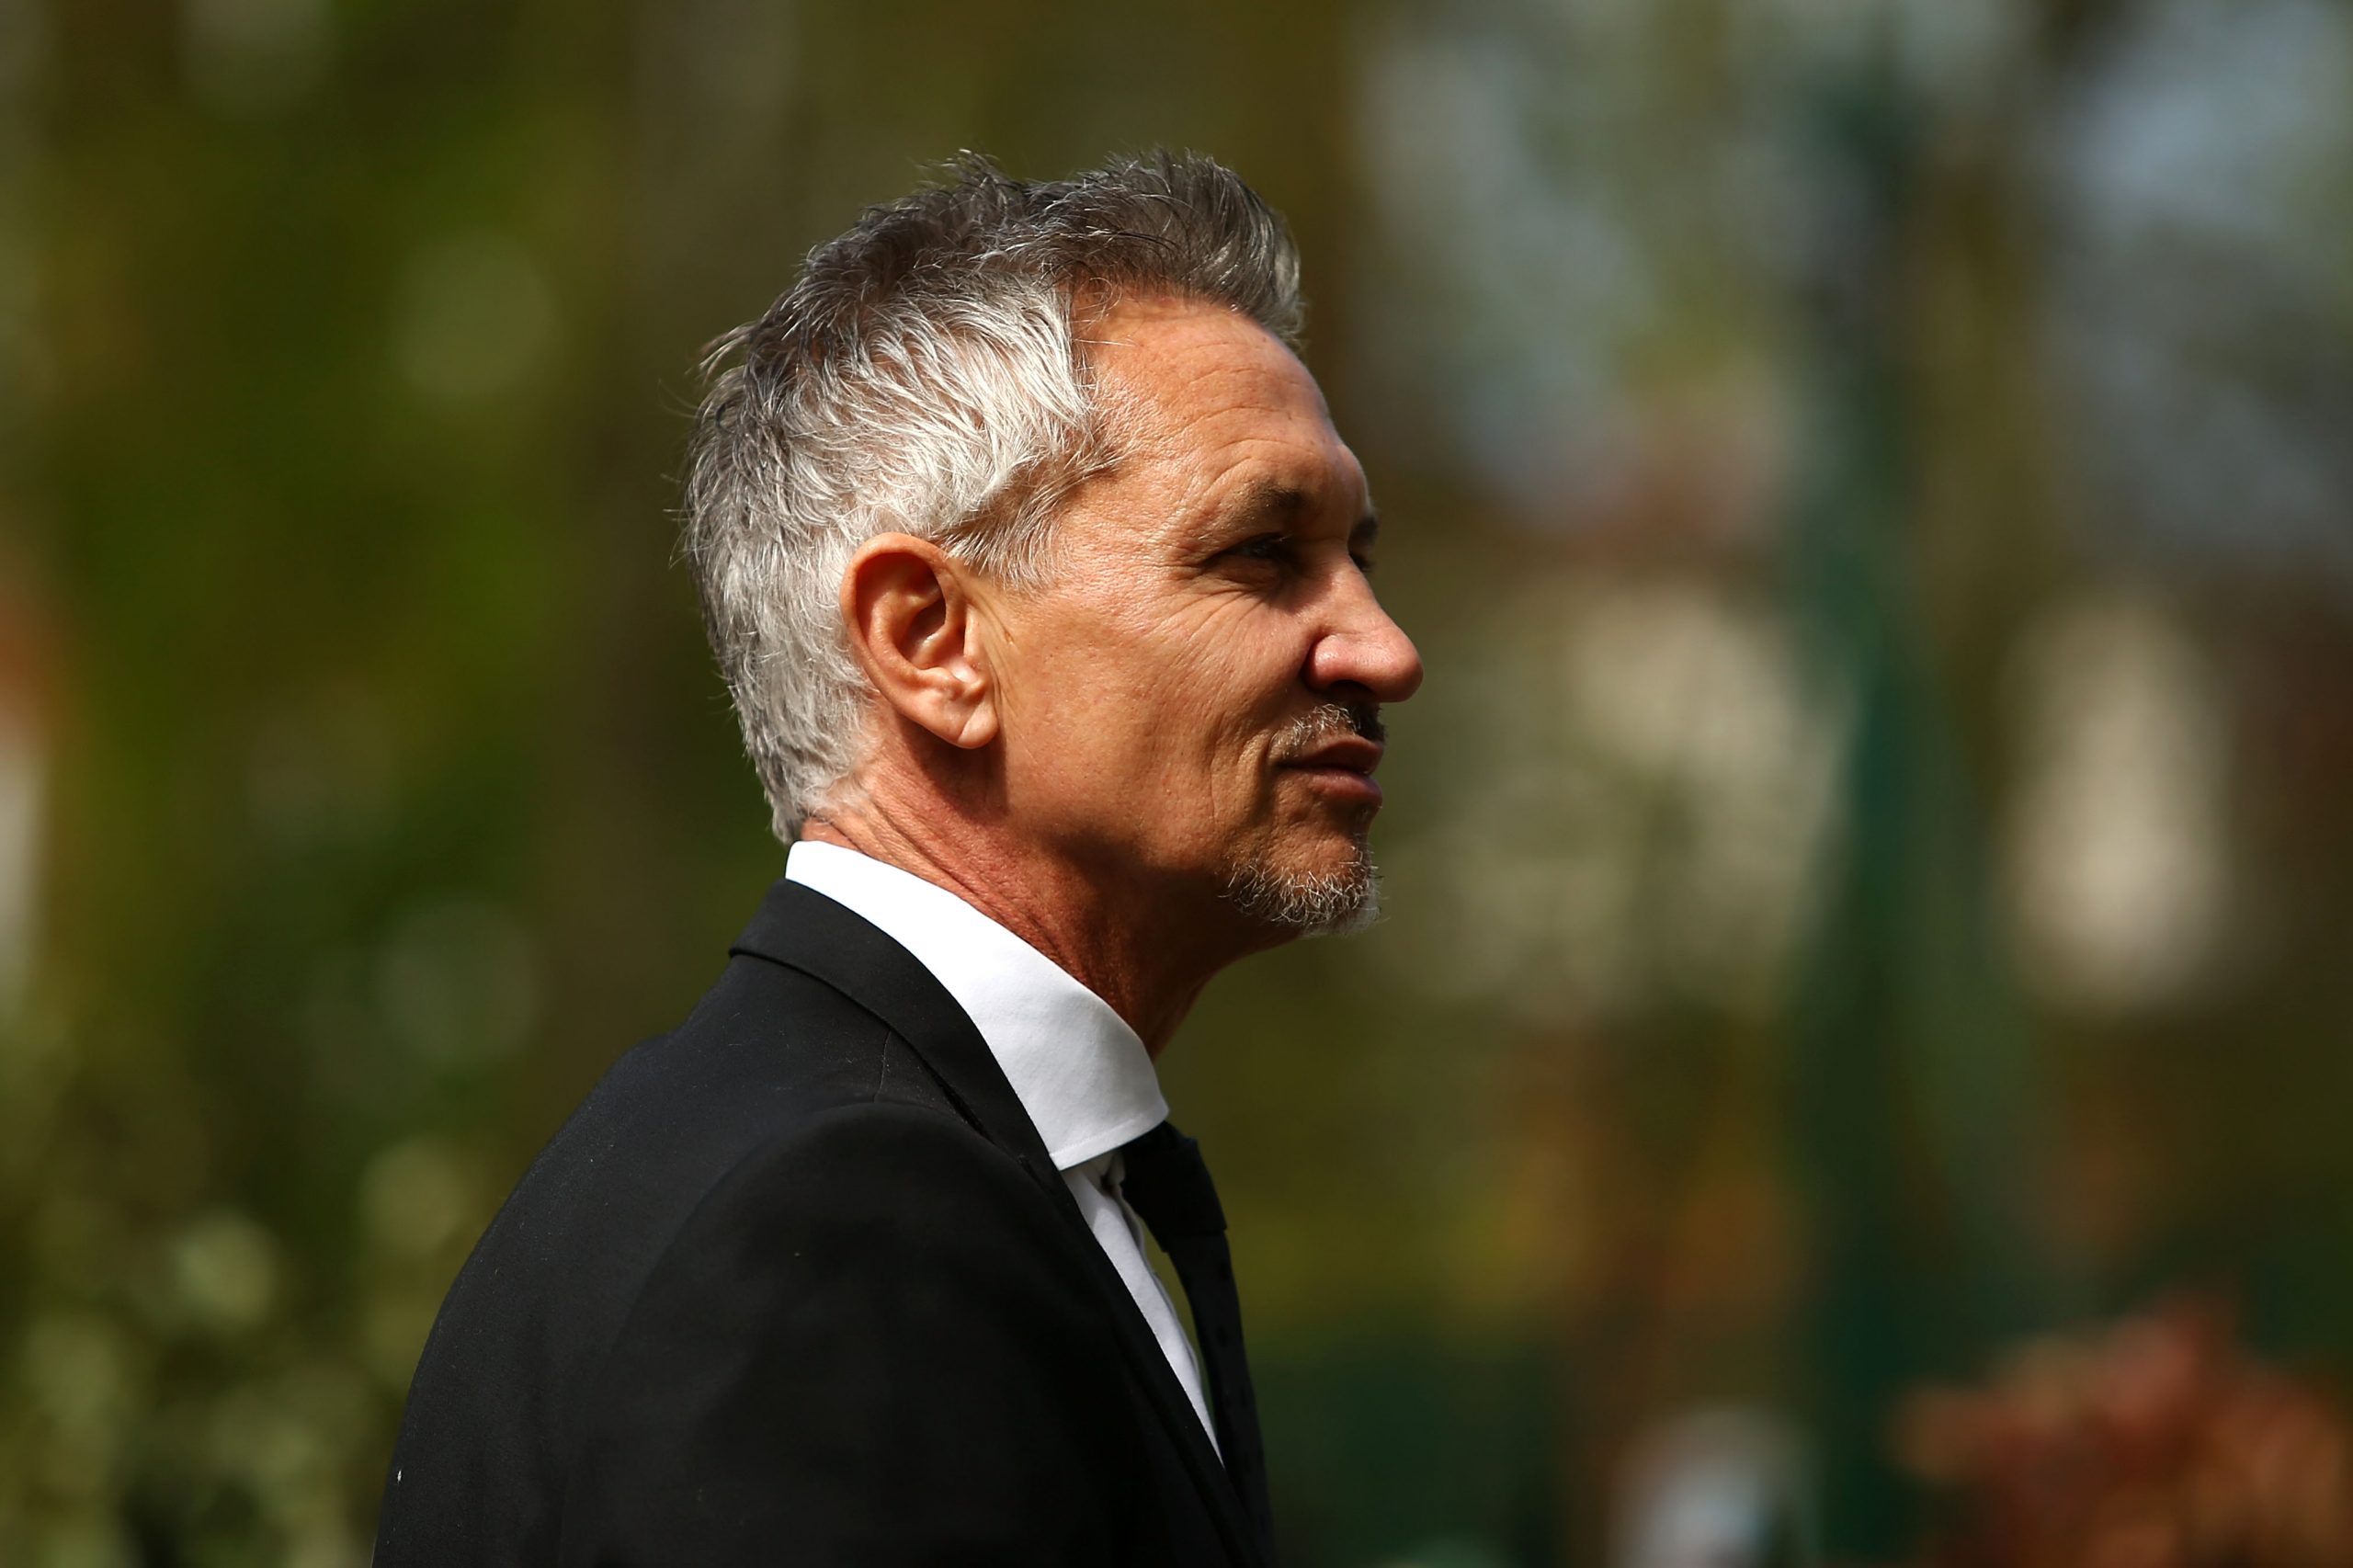 BBC Match of the Day presenter Gary Lineker revealed his surprise over the departure of Anthony Elanga from Manchester United.